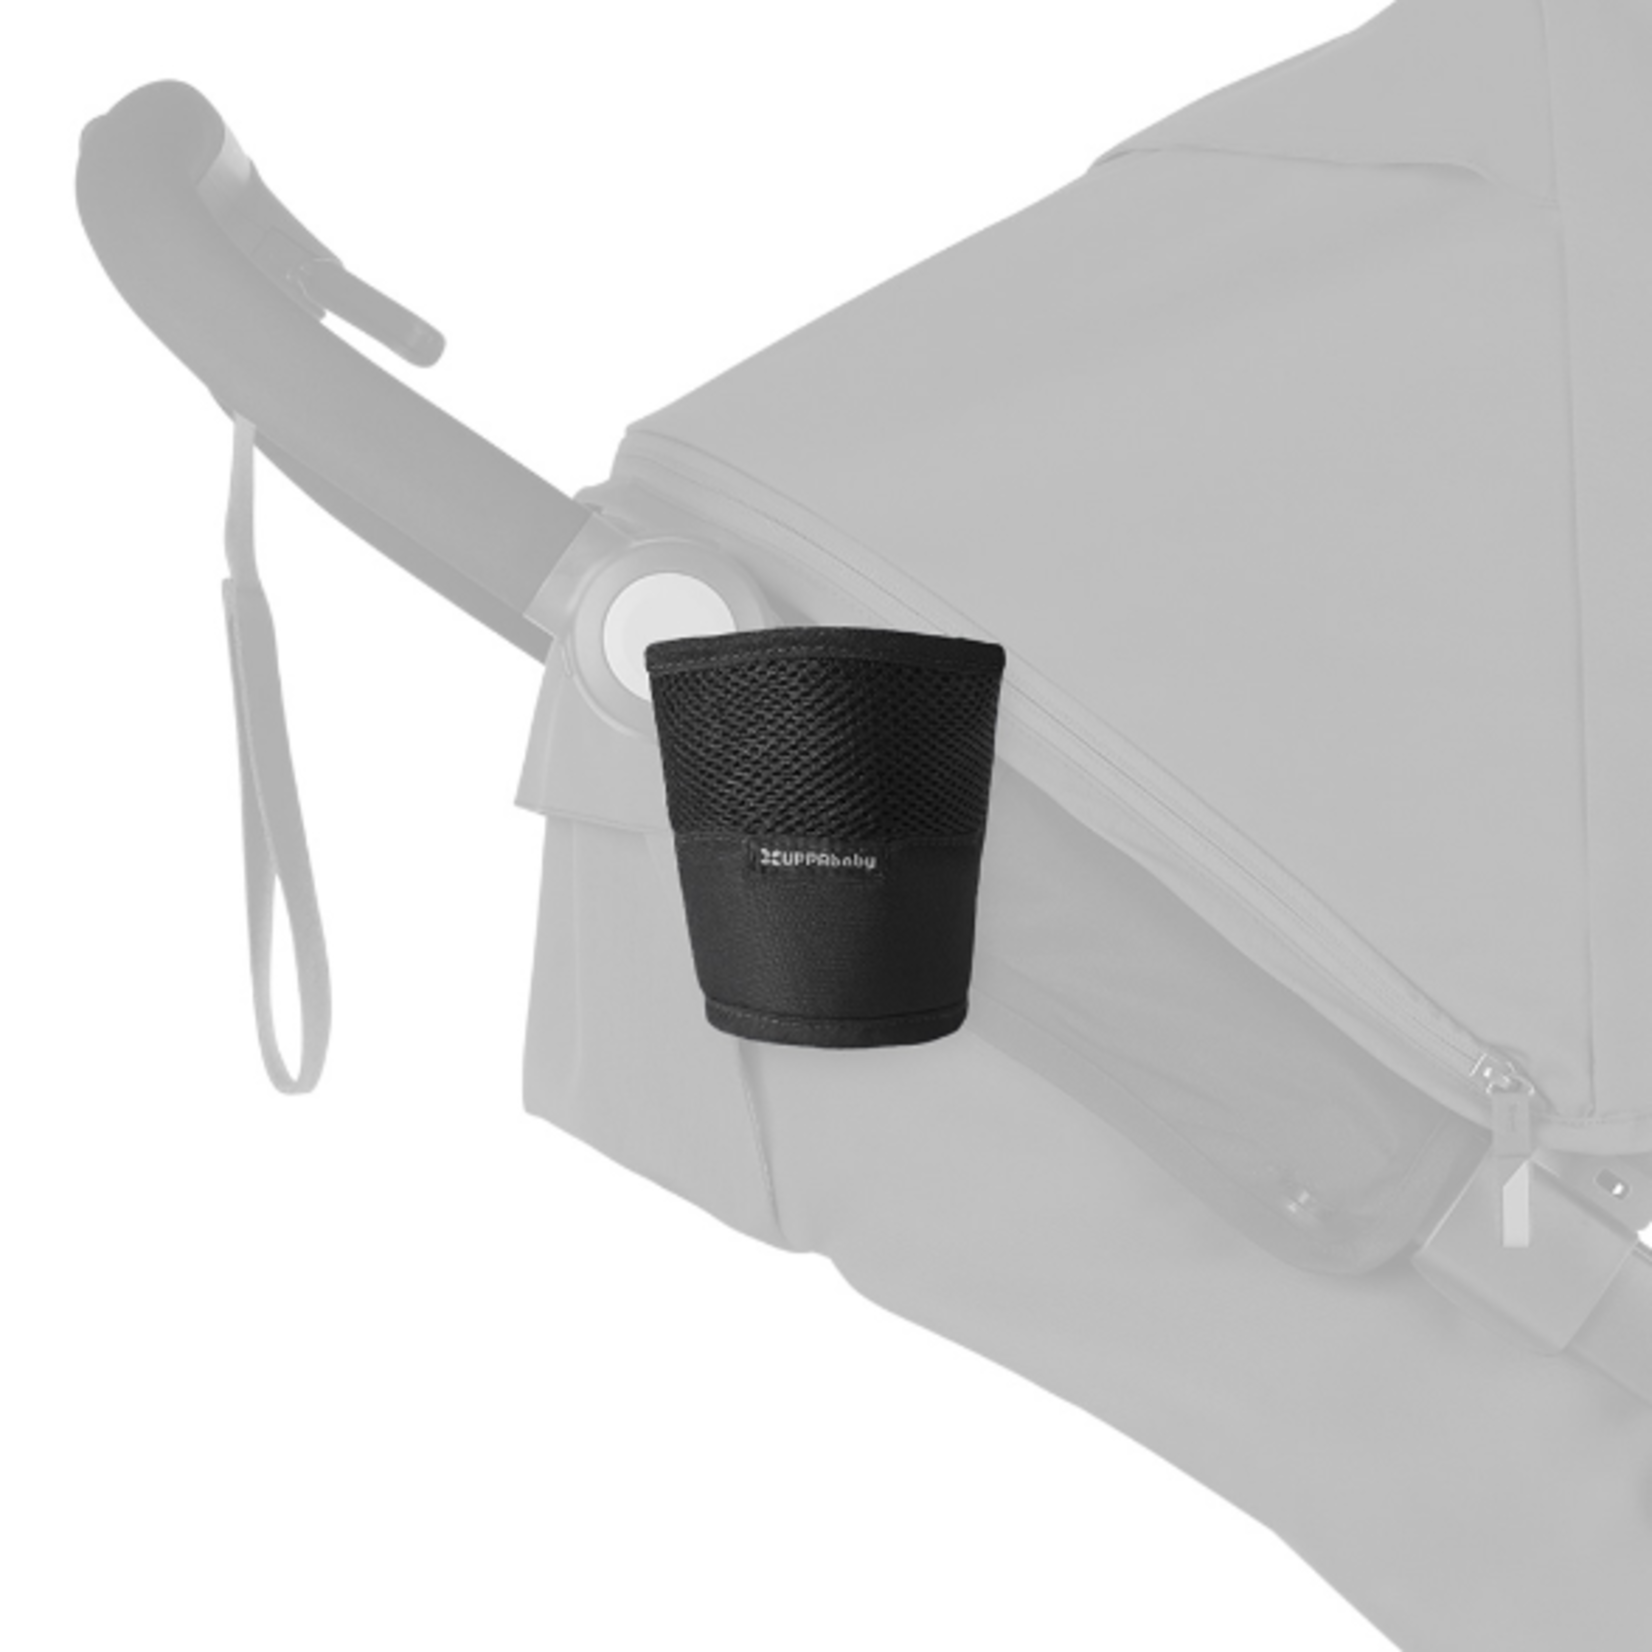 Uppababy UPPABABY RIDGE COLLAPSIBLE CUP HOLDER